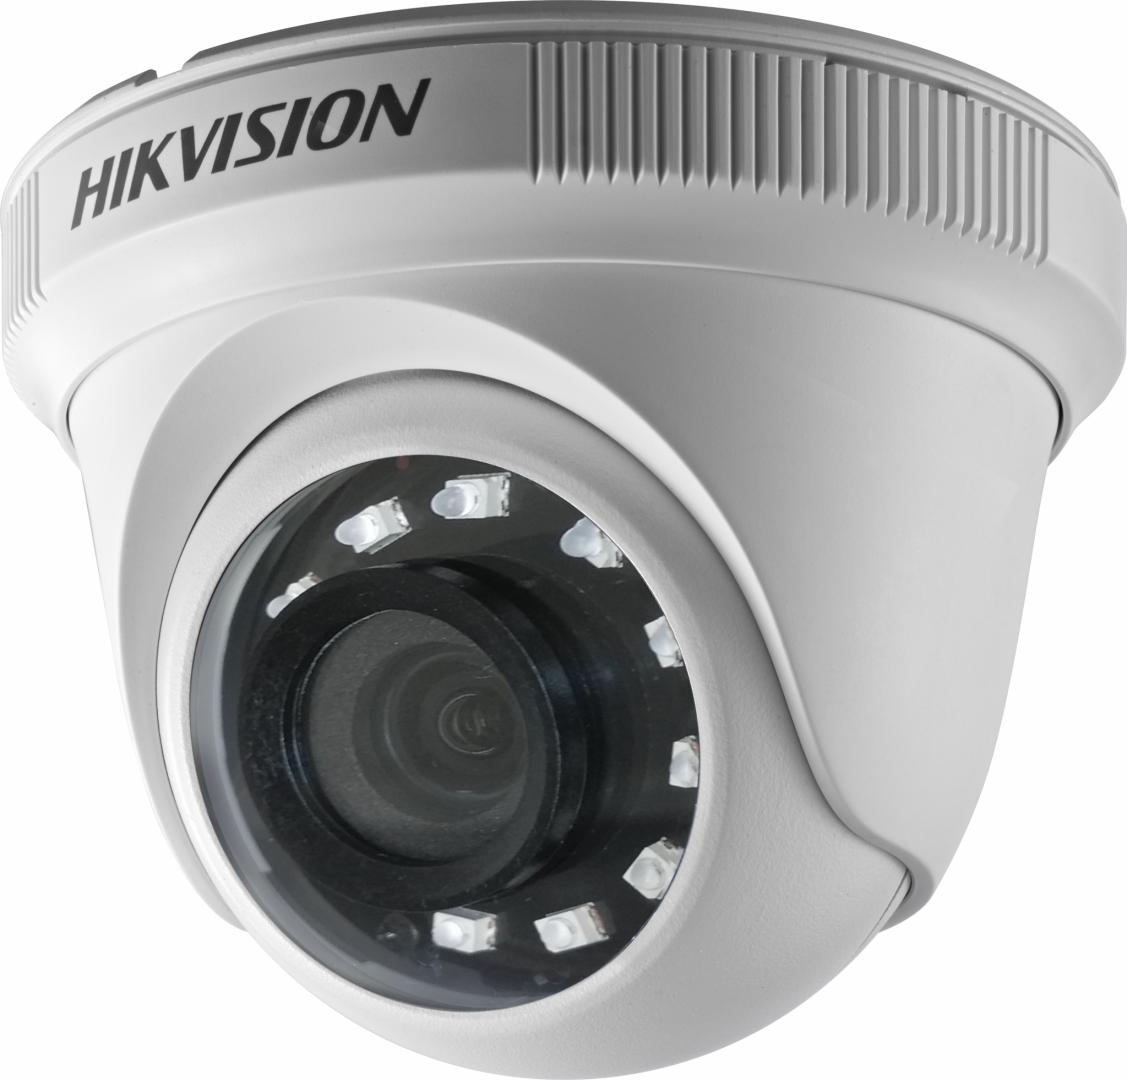 Camera supraveghere Hikvision Turbo HD turret, DS-2CE56D0T-IRPF(2.8mm) (C)